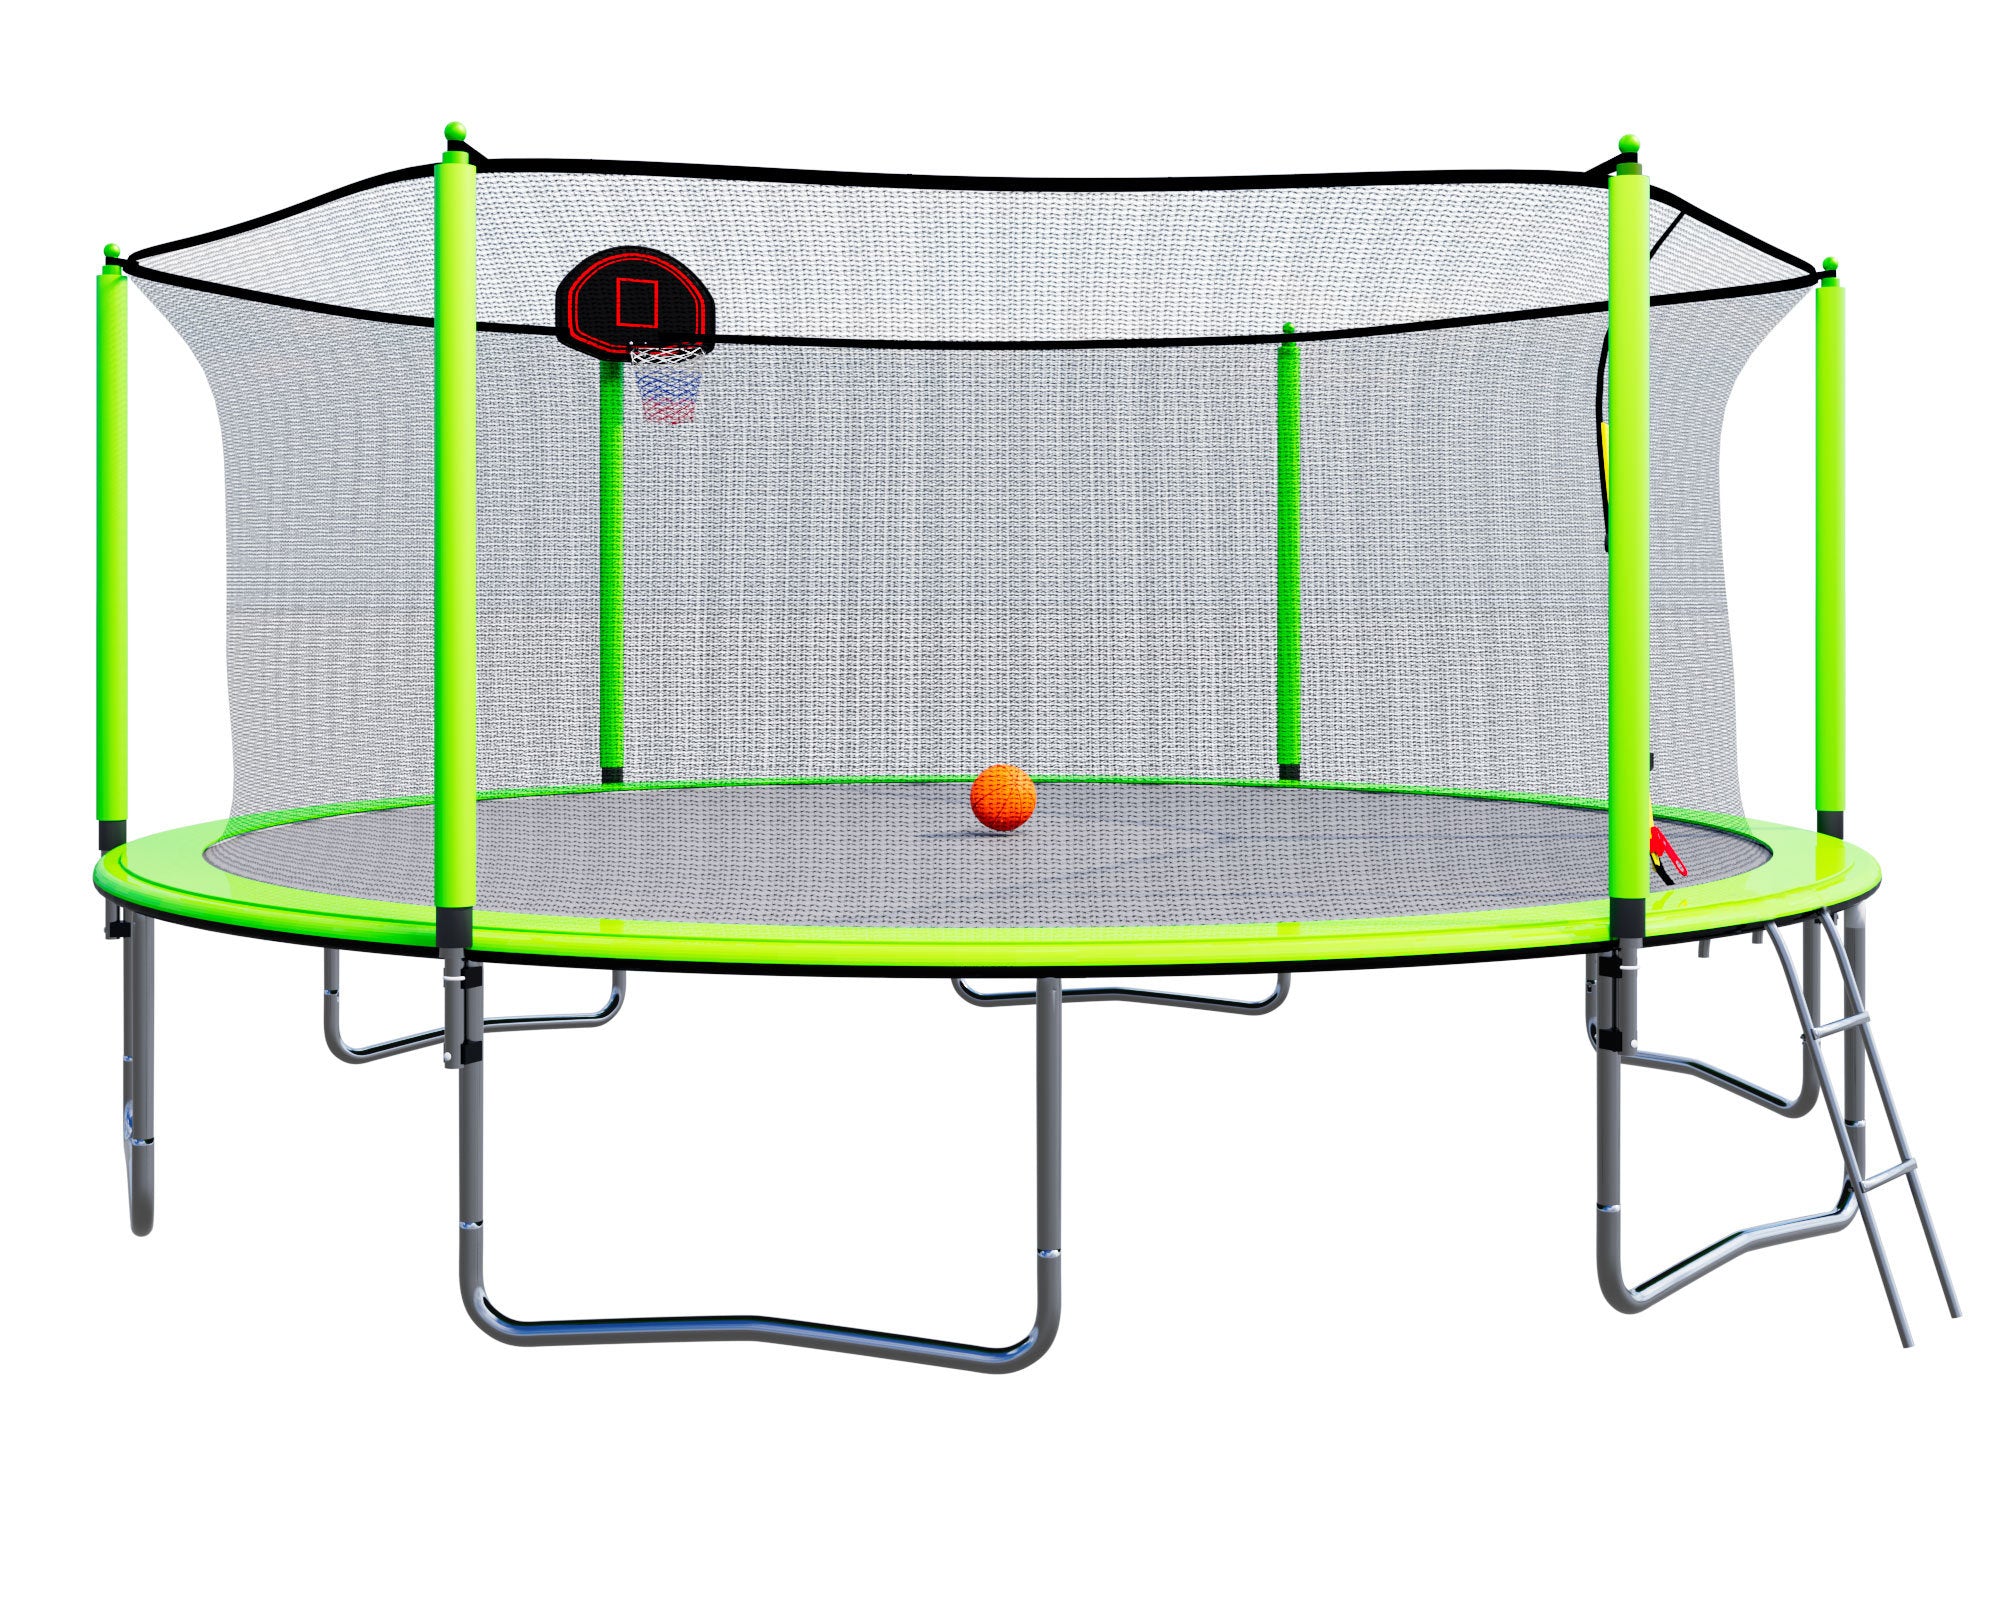 15FT Trampoline with Basketball Hoop Inflator and Ladder(Inner Safety Enclosure) Green